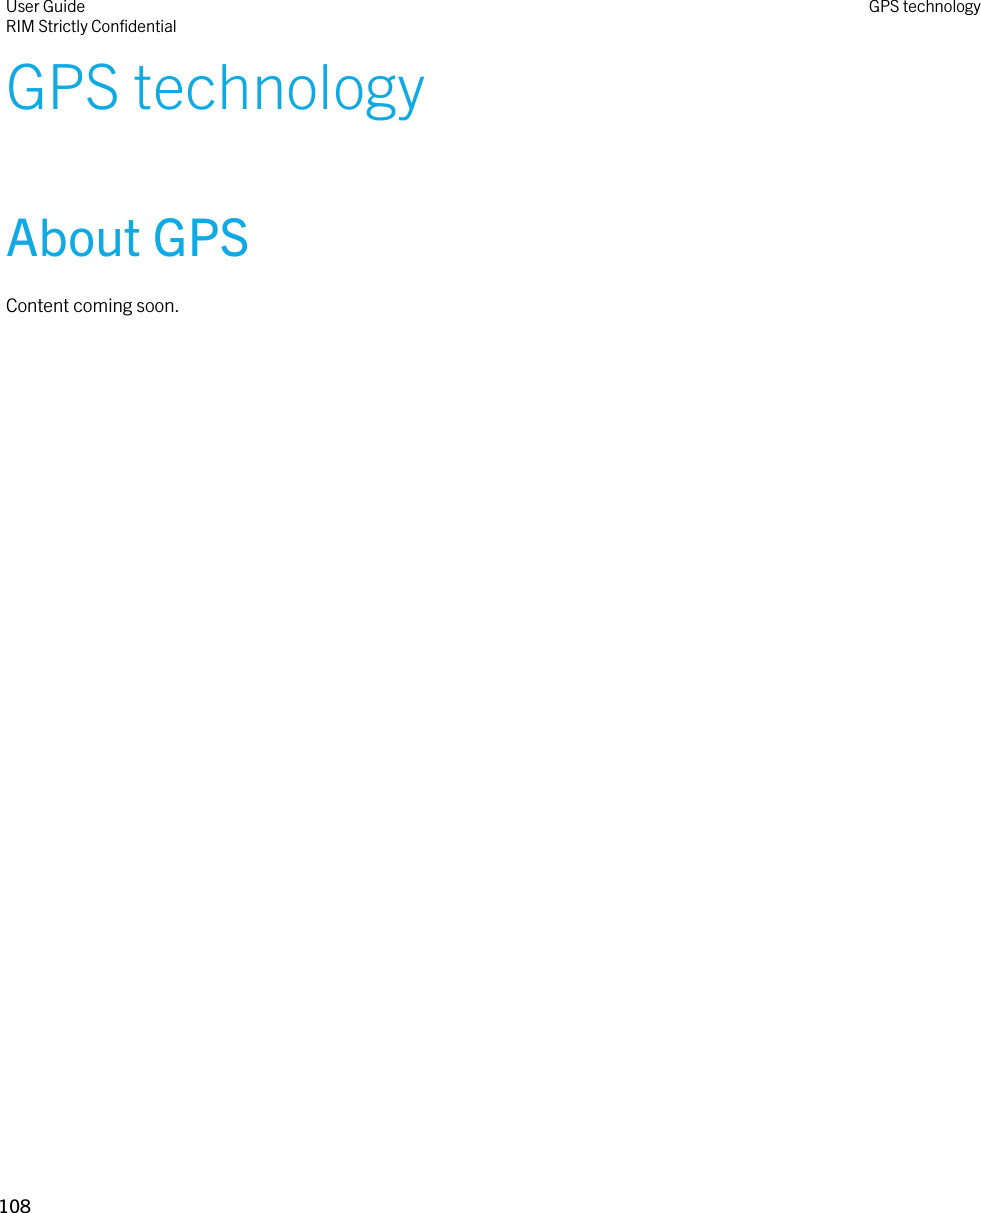 GPS technologyAbout GPSContent coming soon.User GuideRIM Strictly Confidential GPS technology108 